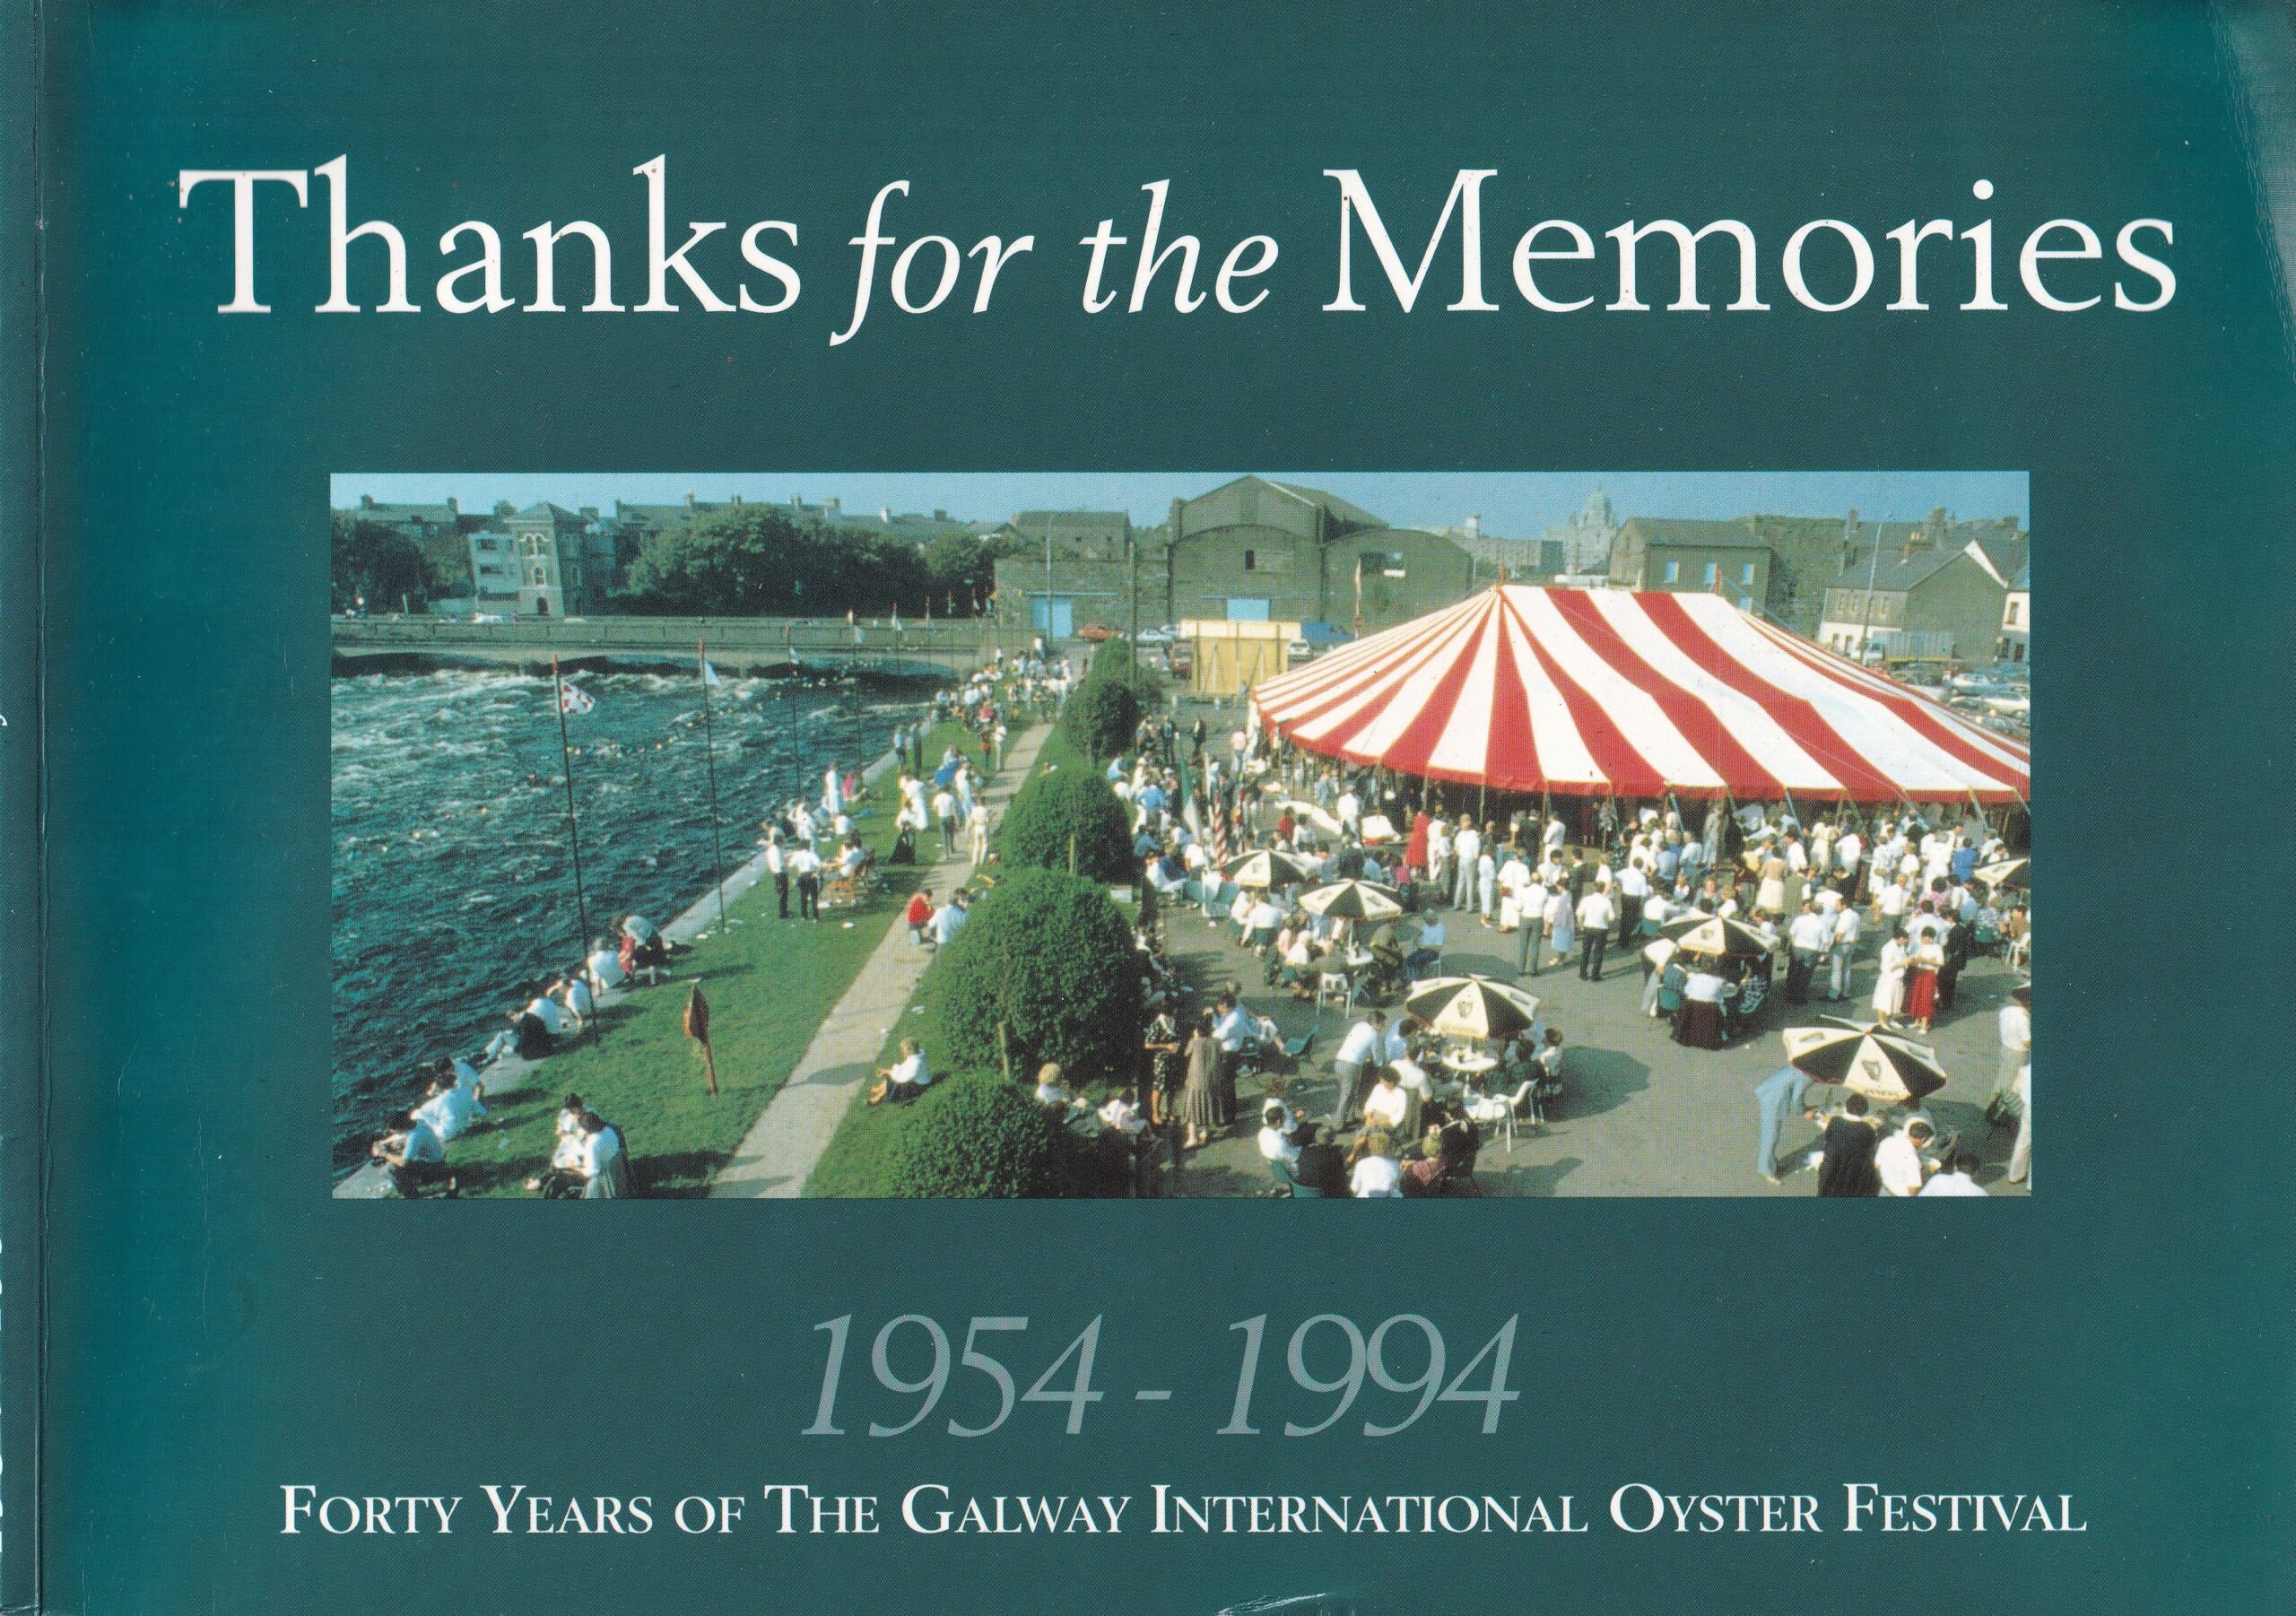 Thanks for the Memories: Forty Years of the Galway International Oyster Festival 1954-1994 by Paddy Ryan (ed.)